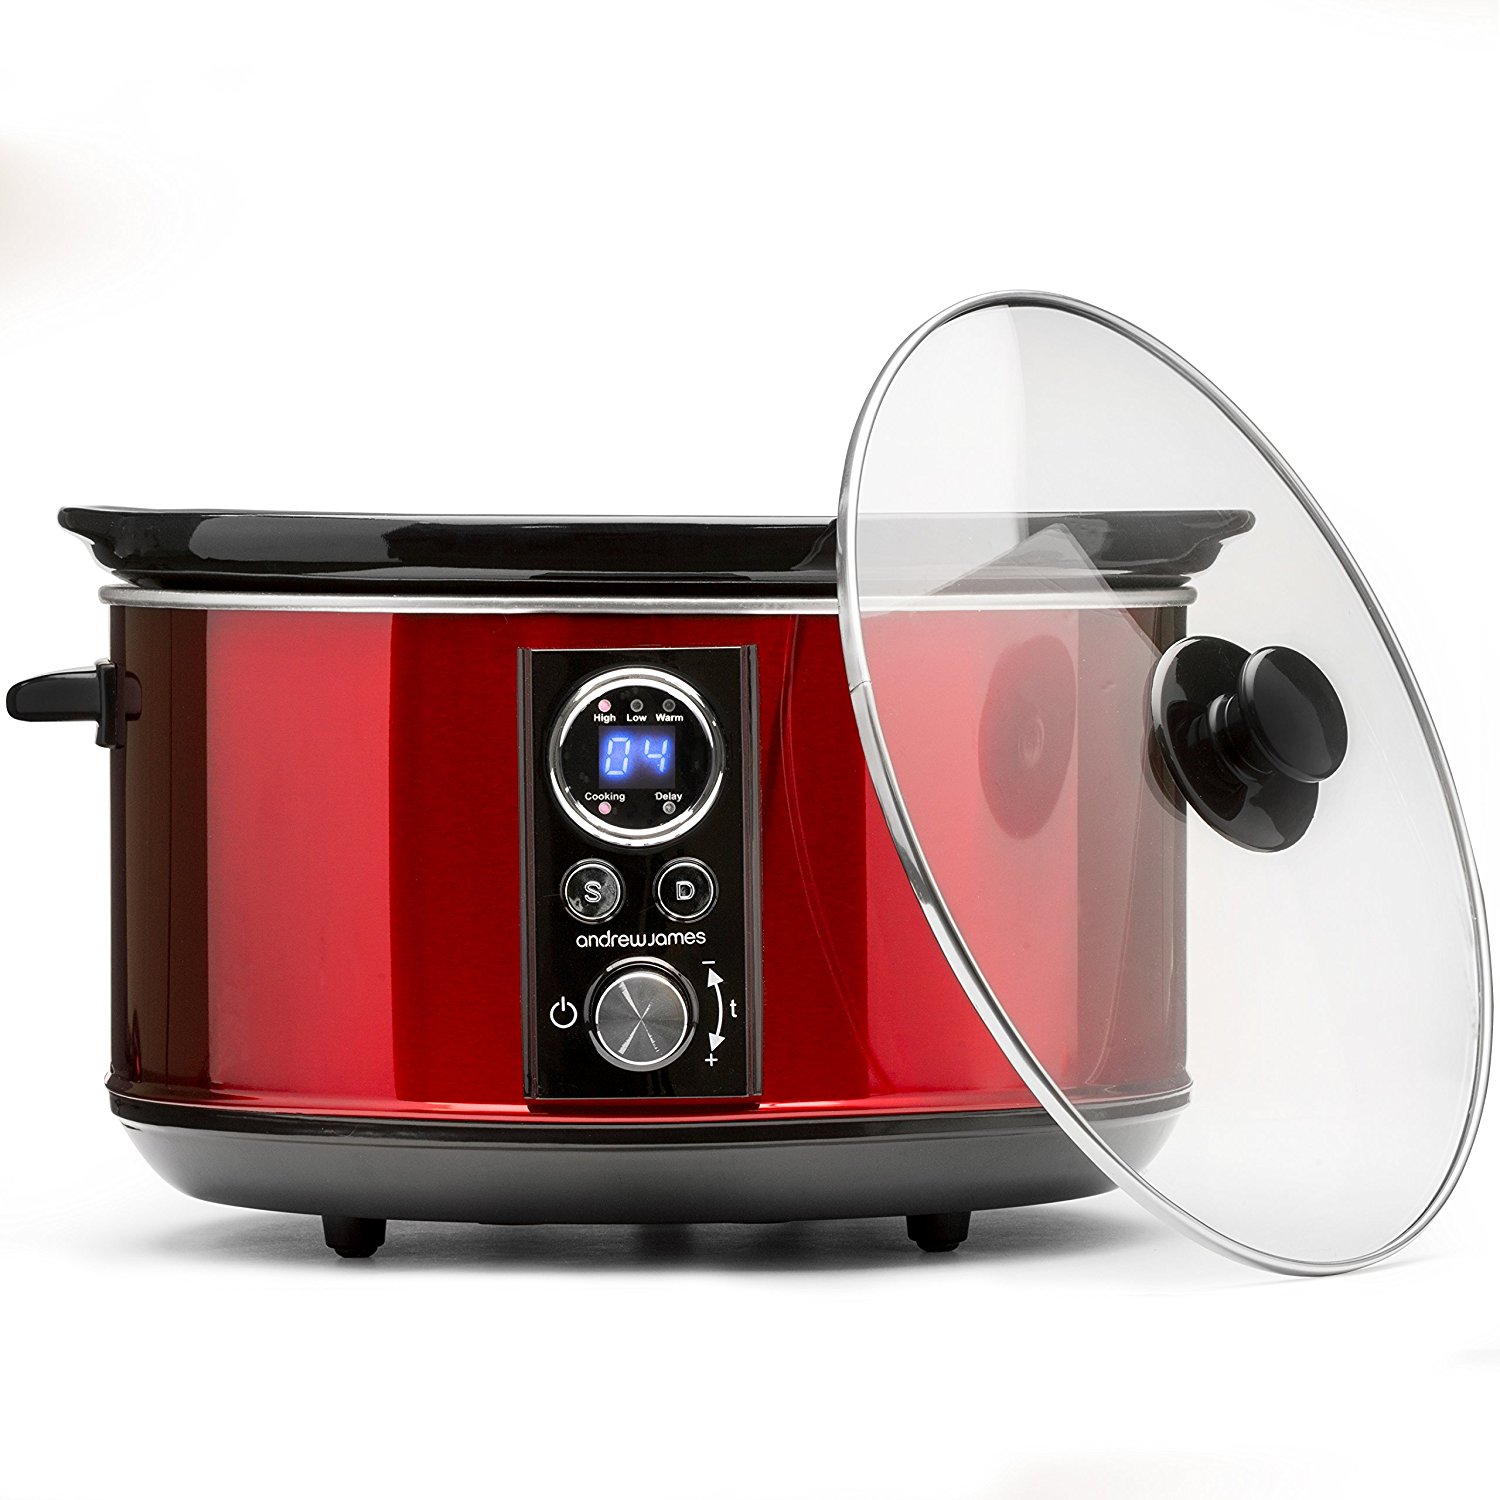 Andrew James Premium Slow Cooker with Timer, 6.5L Red Digital Cooker with Removable Ceramic Bowl, Tempered Glass Lid, Delayed Start and Keep Warm Functions